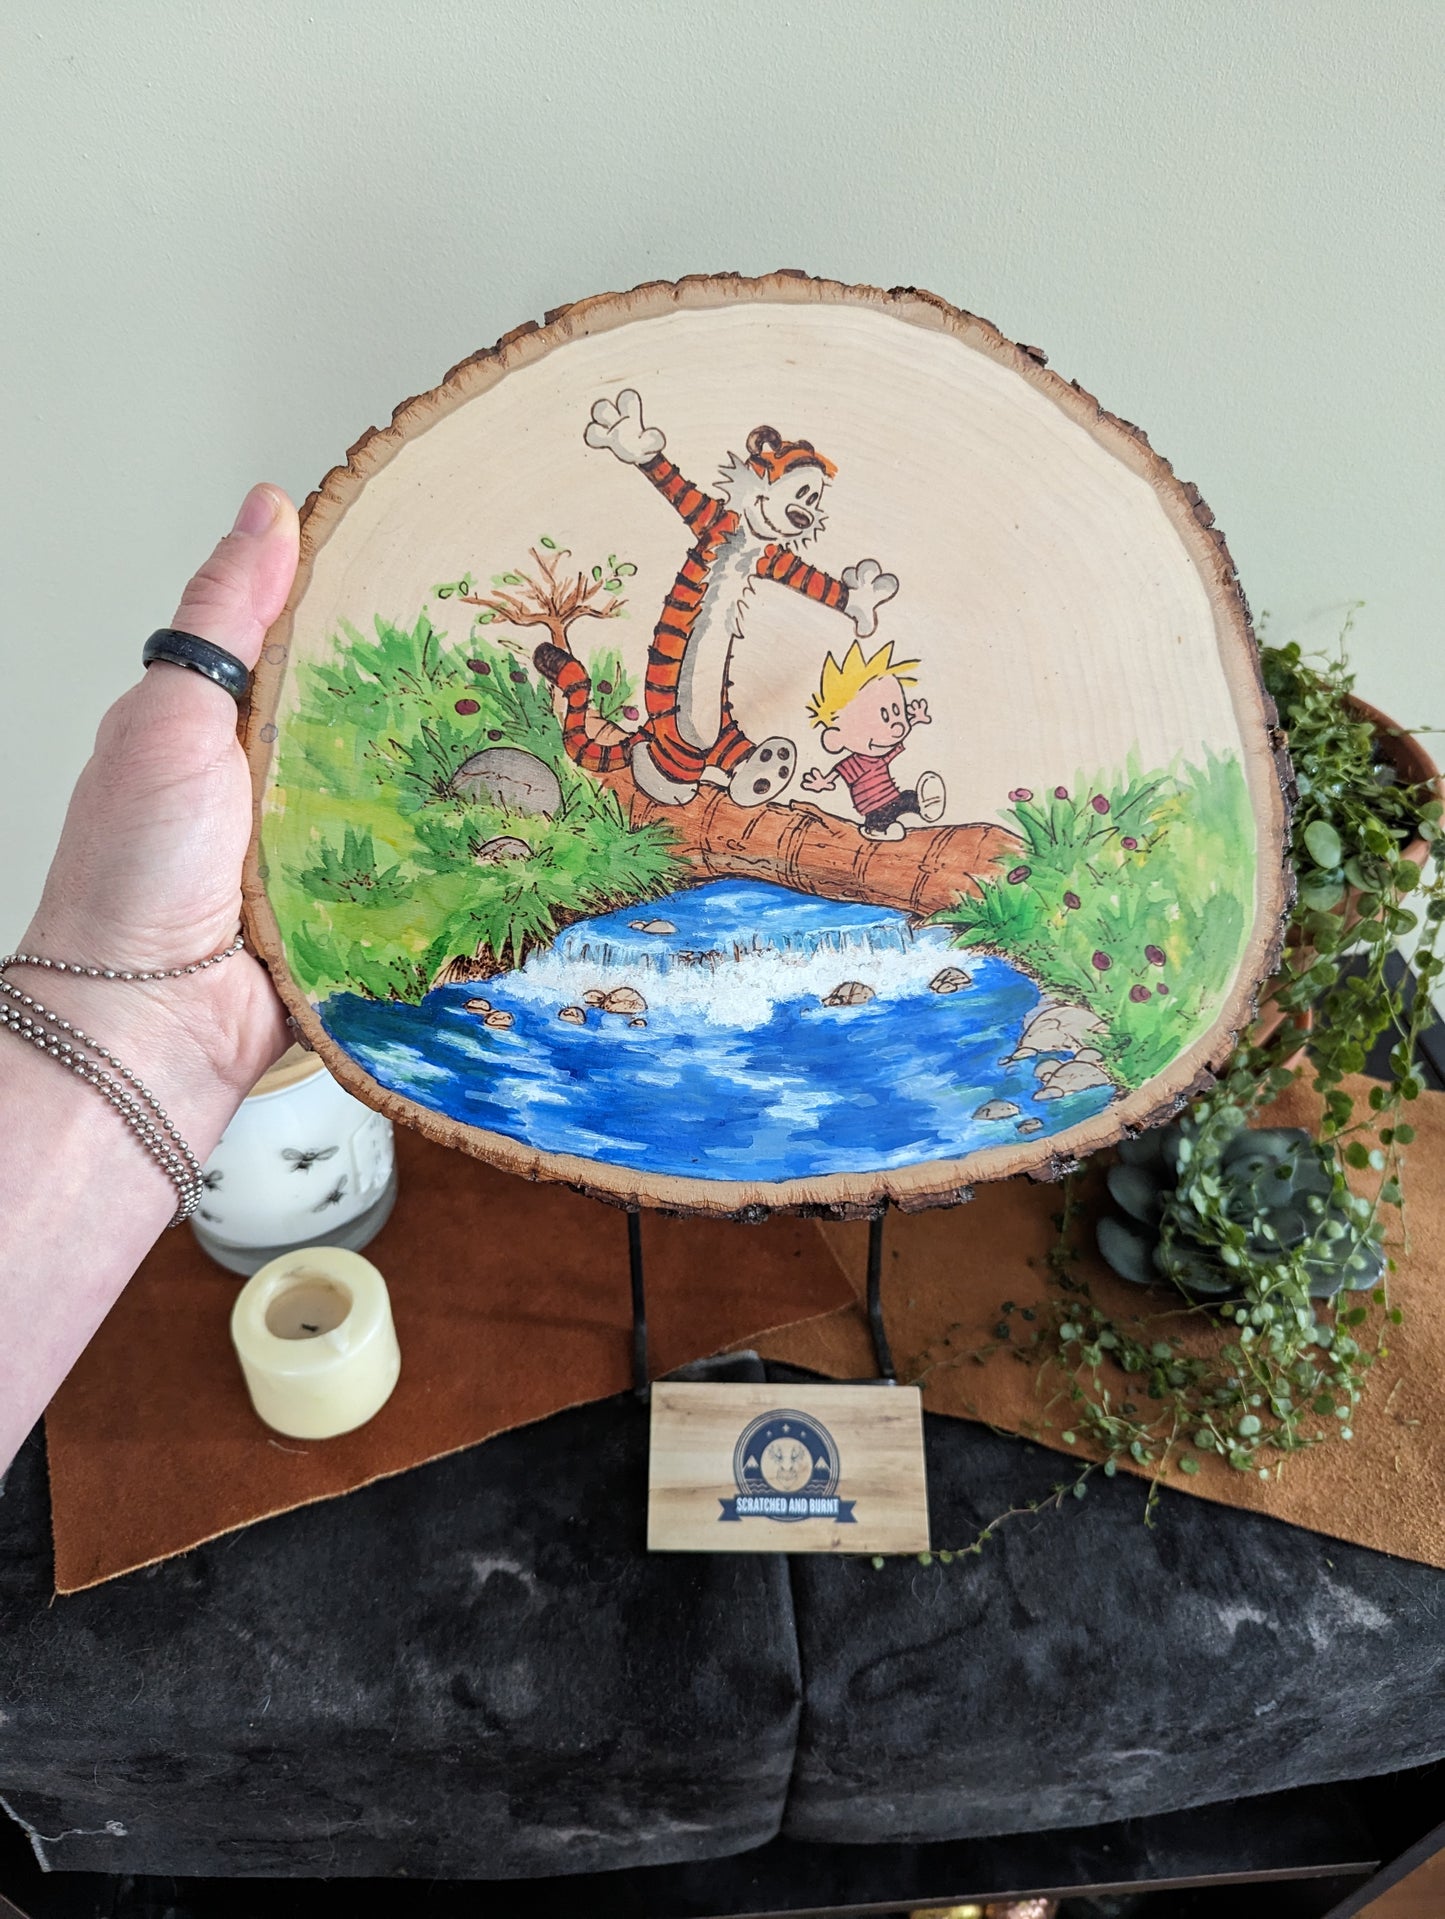 Calvin and Hobbes 'Walking on a Log' Pyrography on Wood Canvas